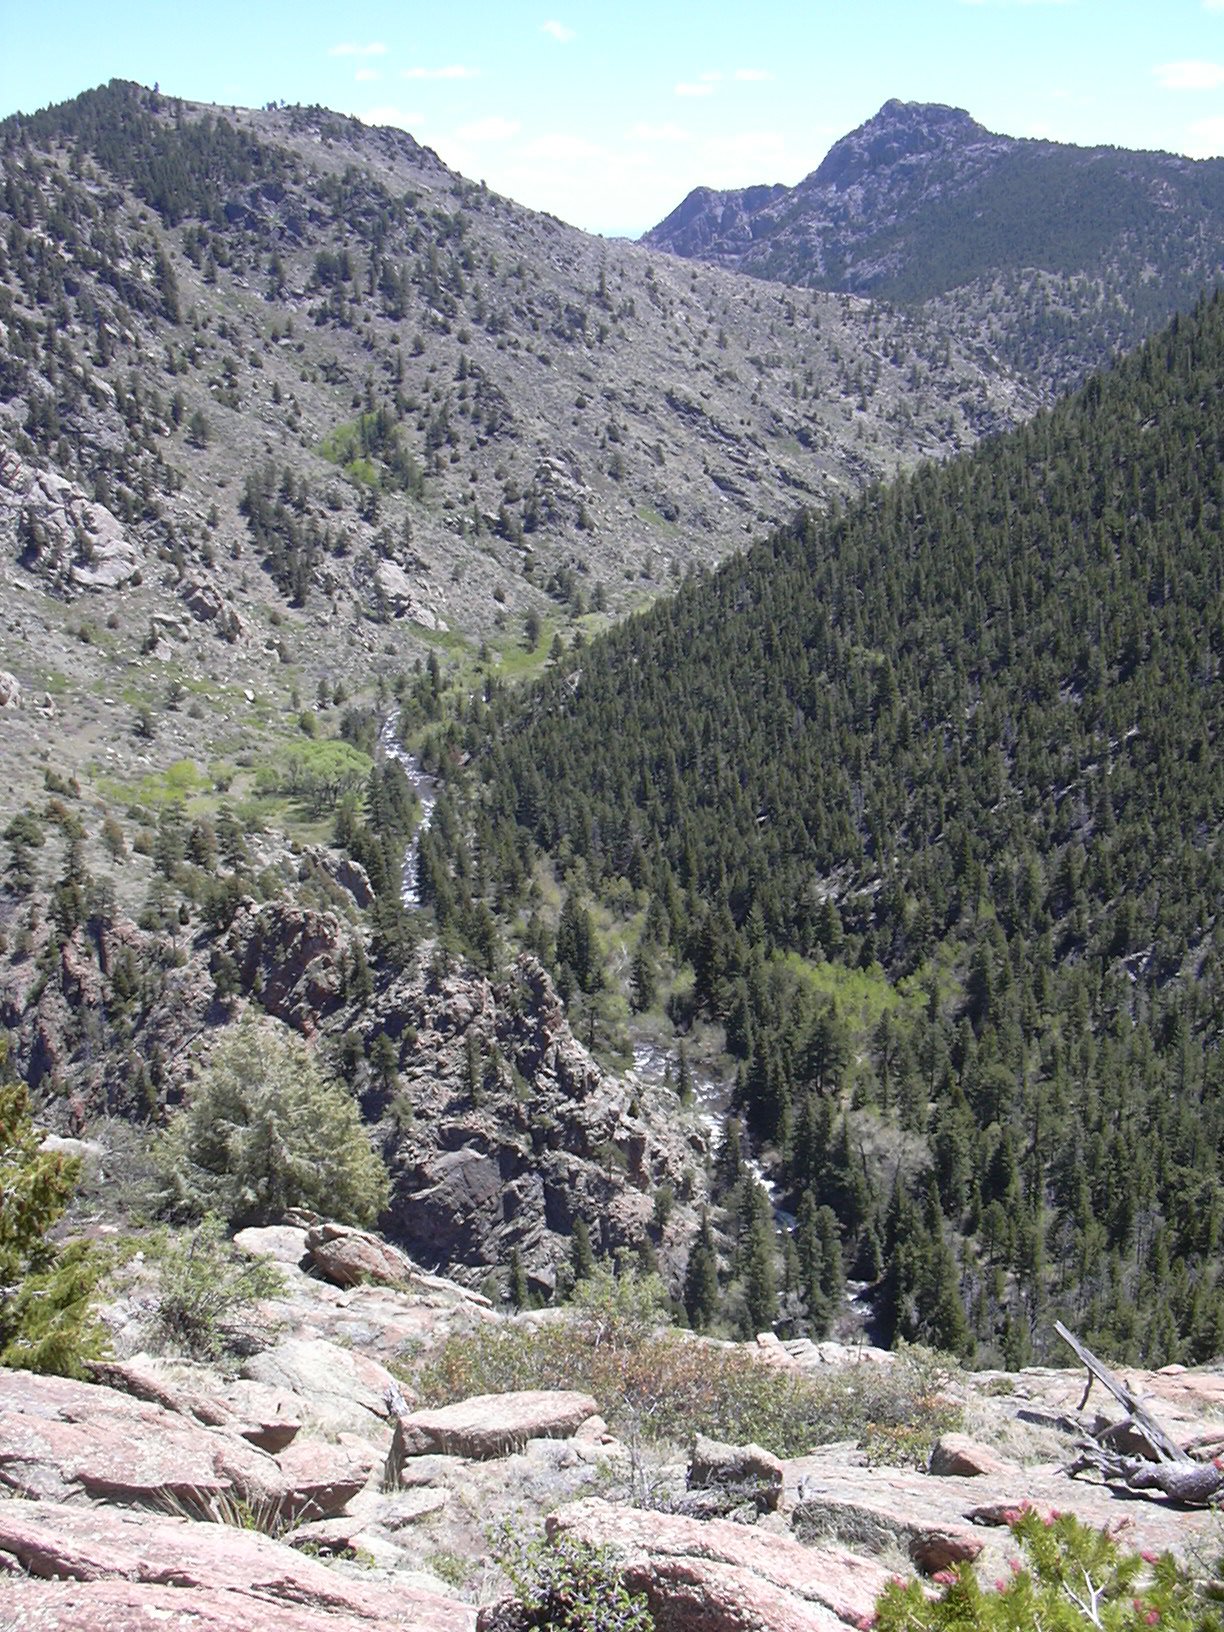 North Saint Vrain Canyon from rock overlook, 05/24/08